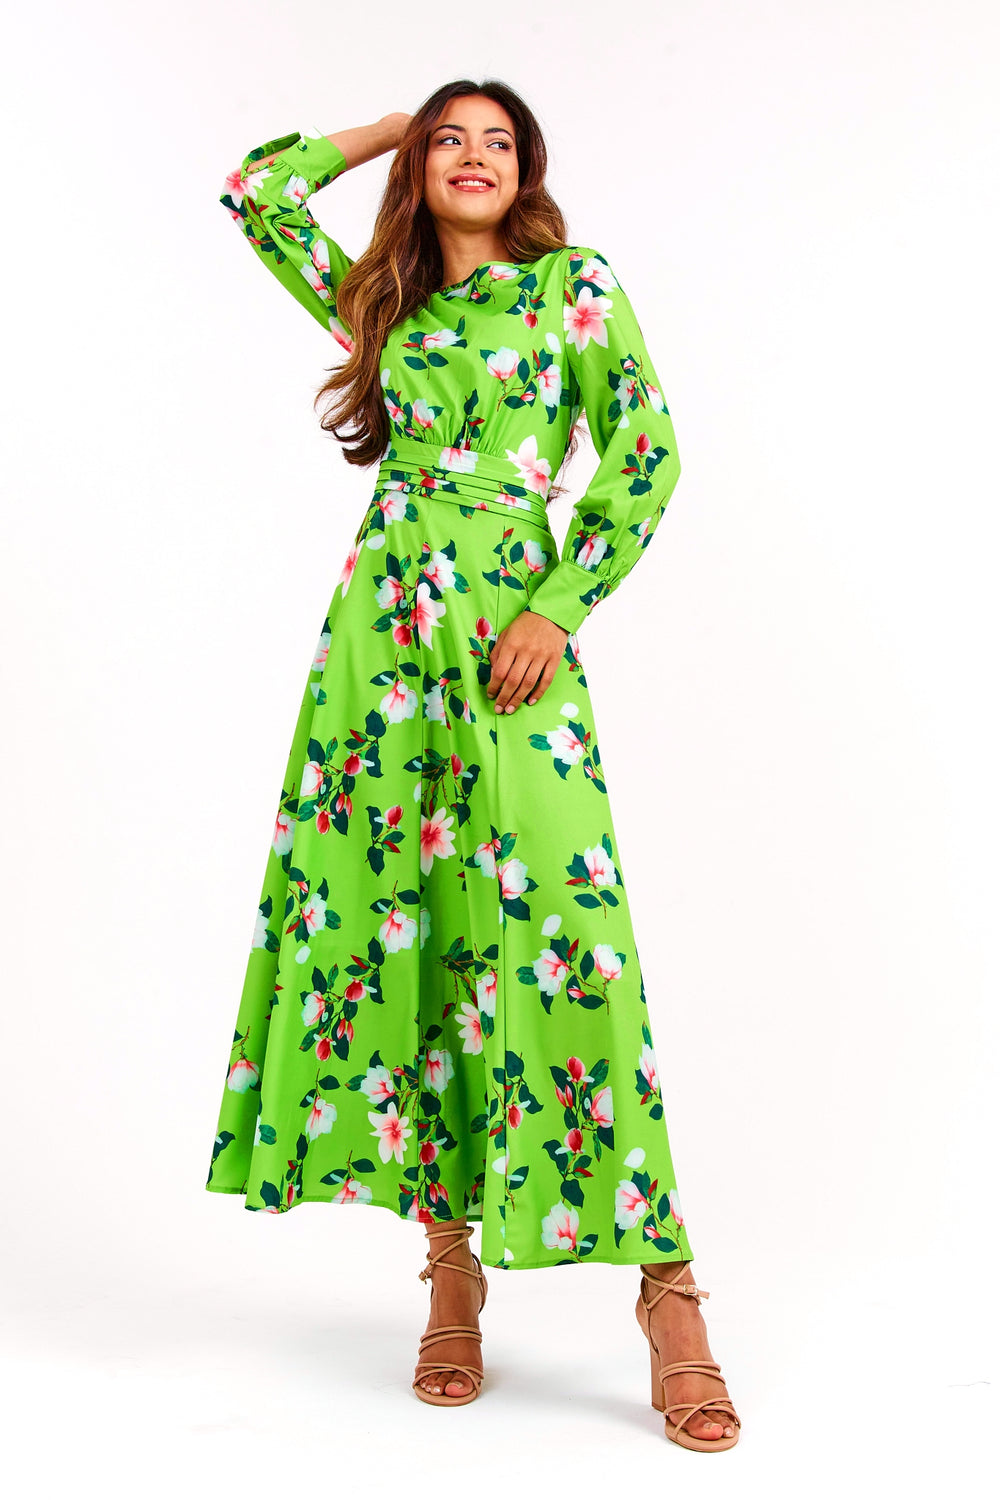 Green Floral Long Maxi Dress - Full Side View 1